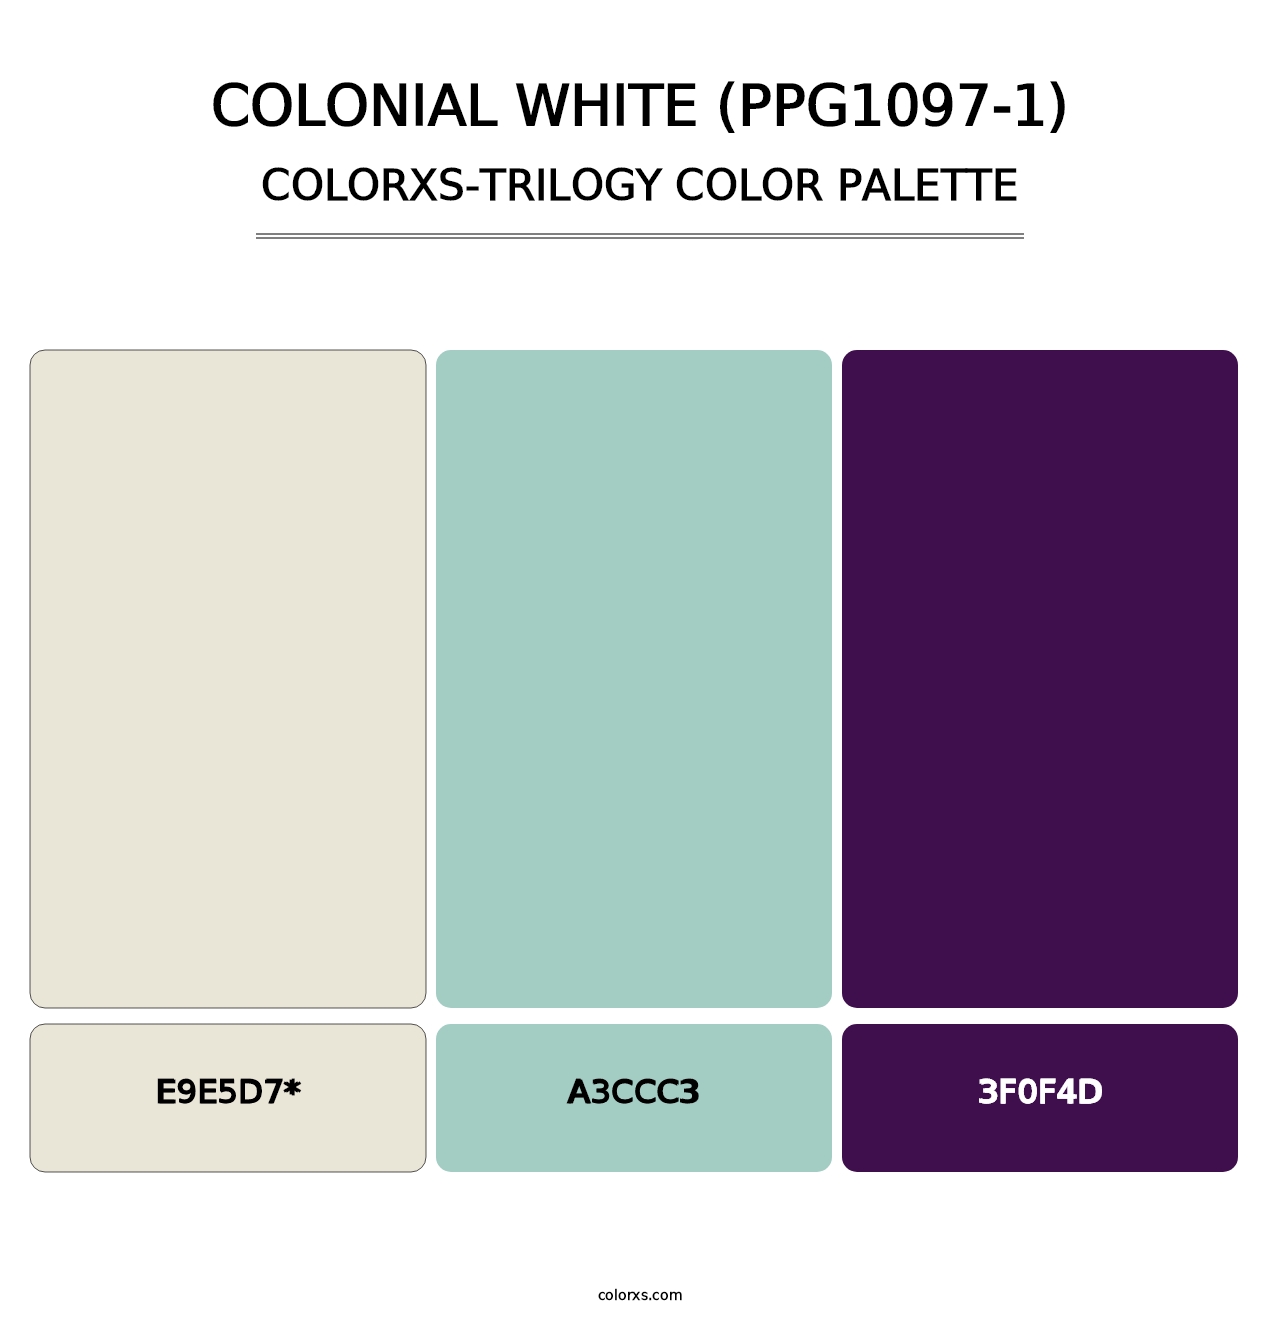 Colonial White (PPG1097-1) - Colorxs Trilogy Palette